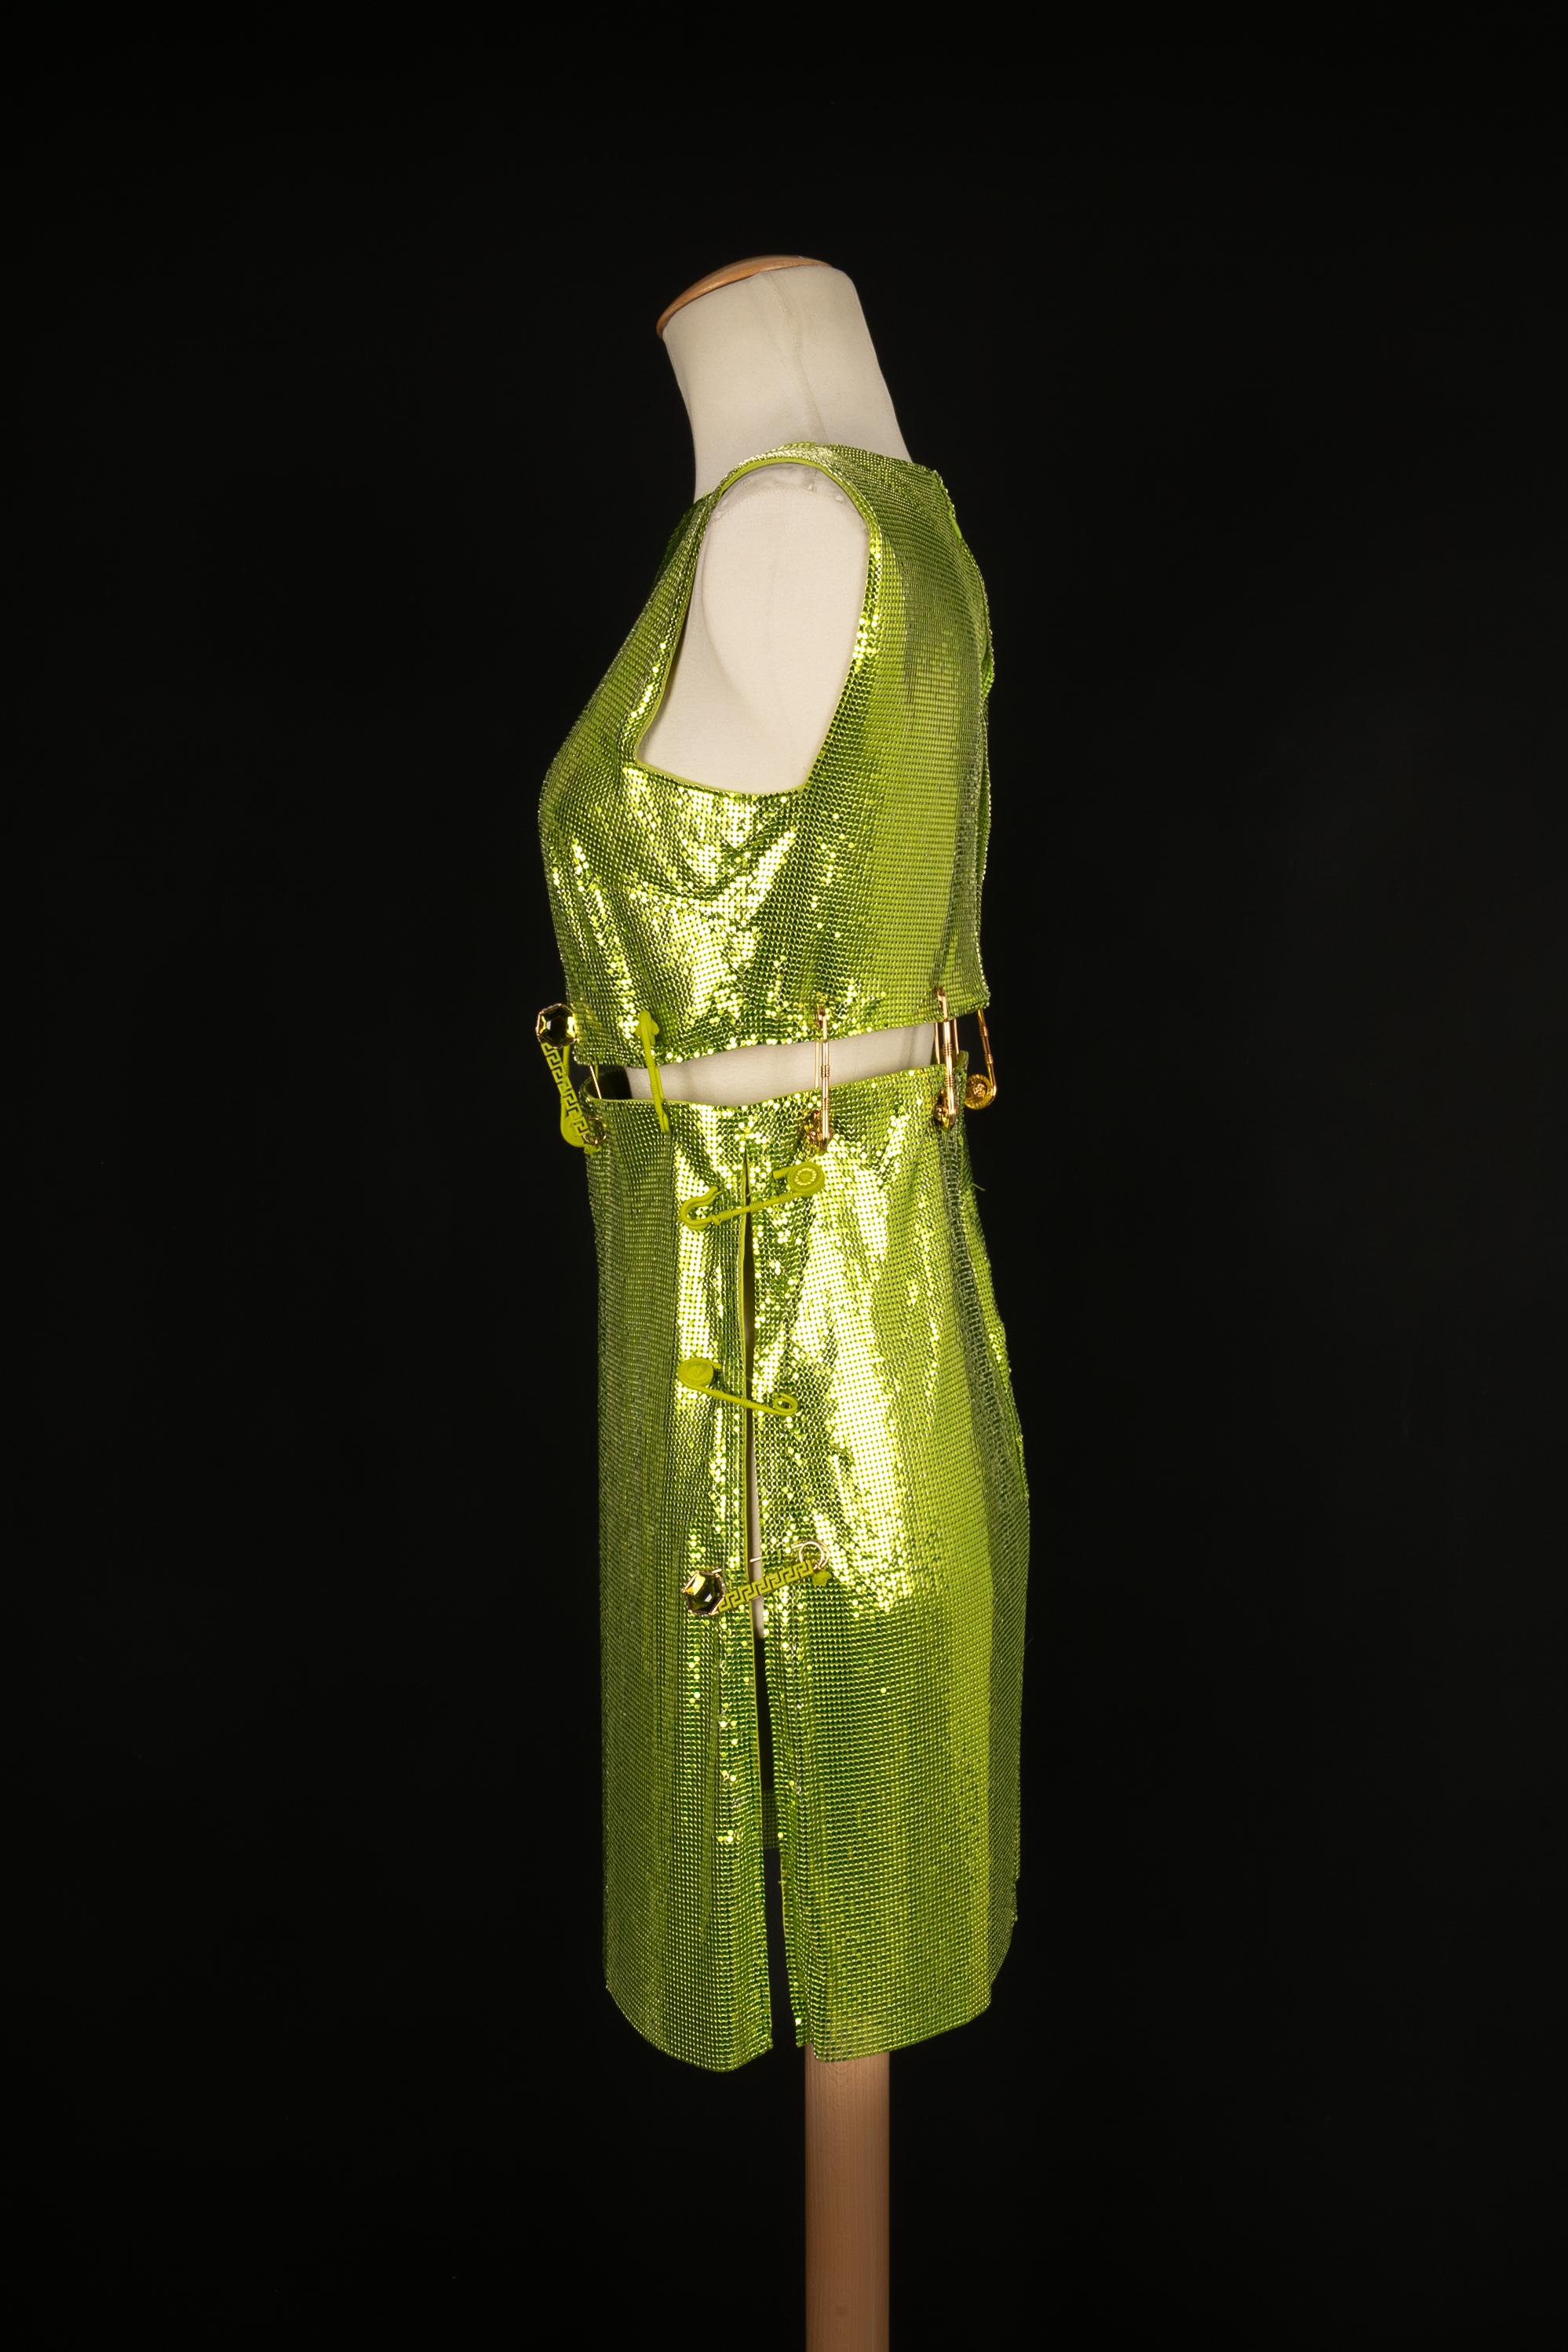 VERSACE - (Made in Italy) Metallic green mesh dress holding impressive safety pins. 36FR size indicated. 2022 Spring-Summer Collection.

Condition:
Very good condition

Dimensions:
Chest length: 40 cm - Waist: 36 cm - Hips: 42 cm - Length: 86